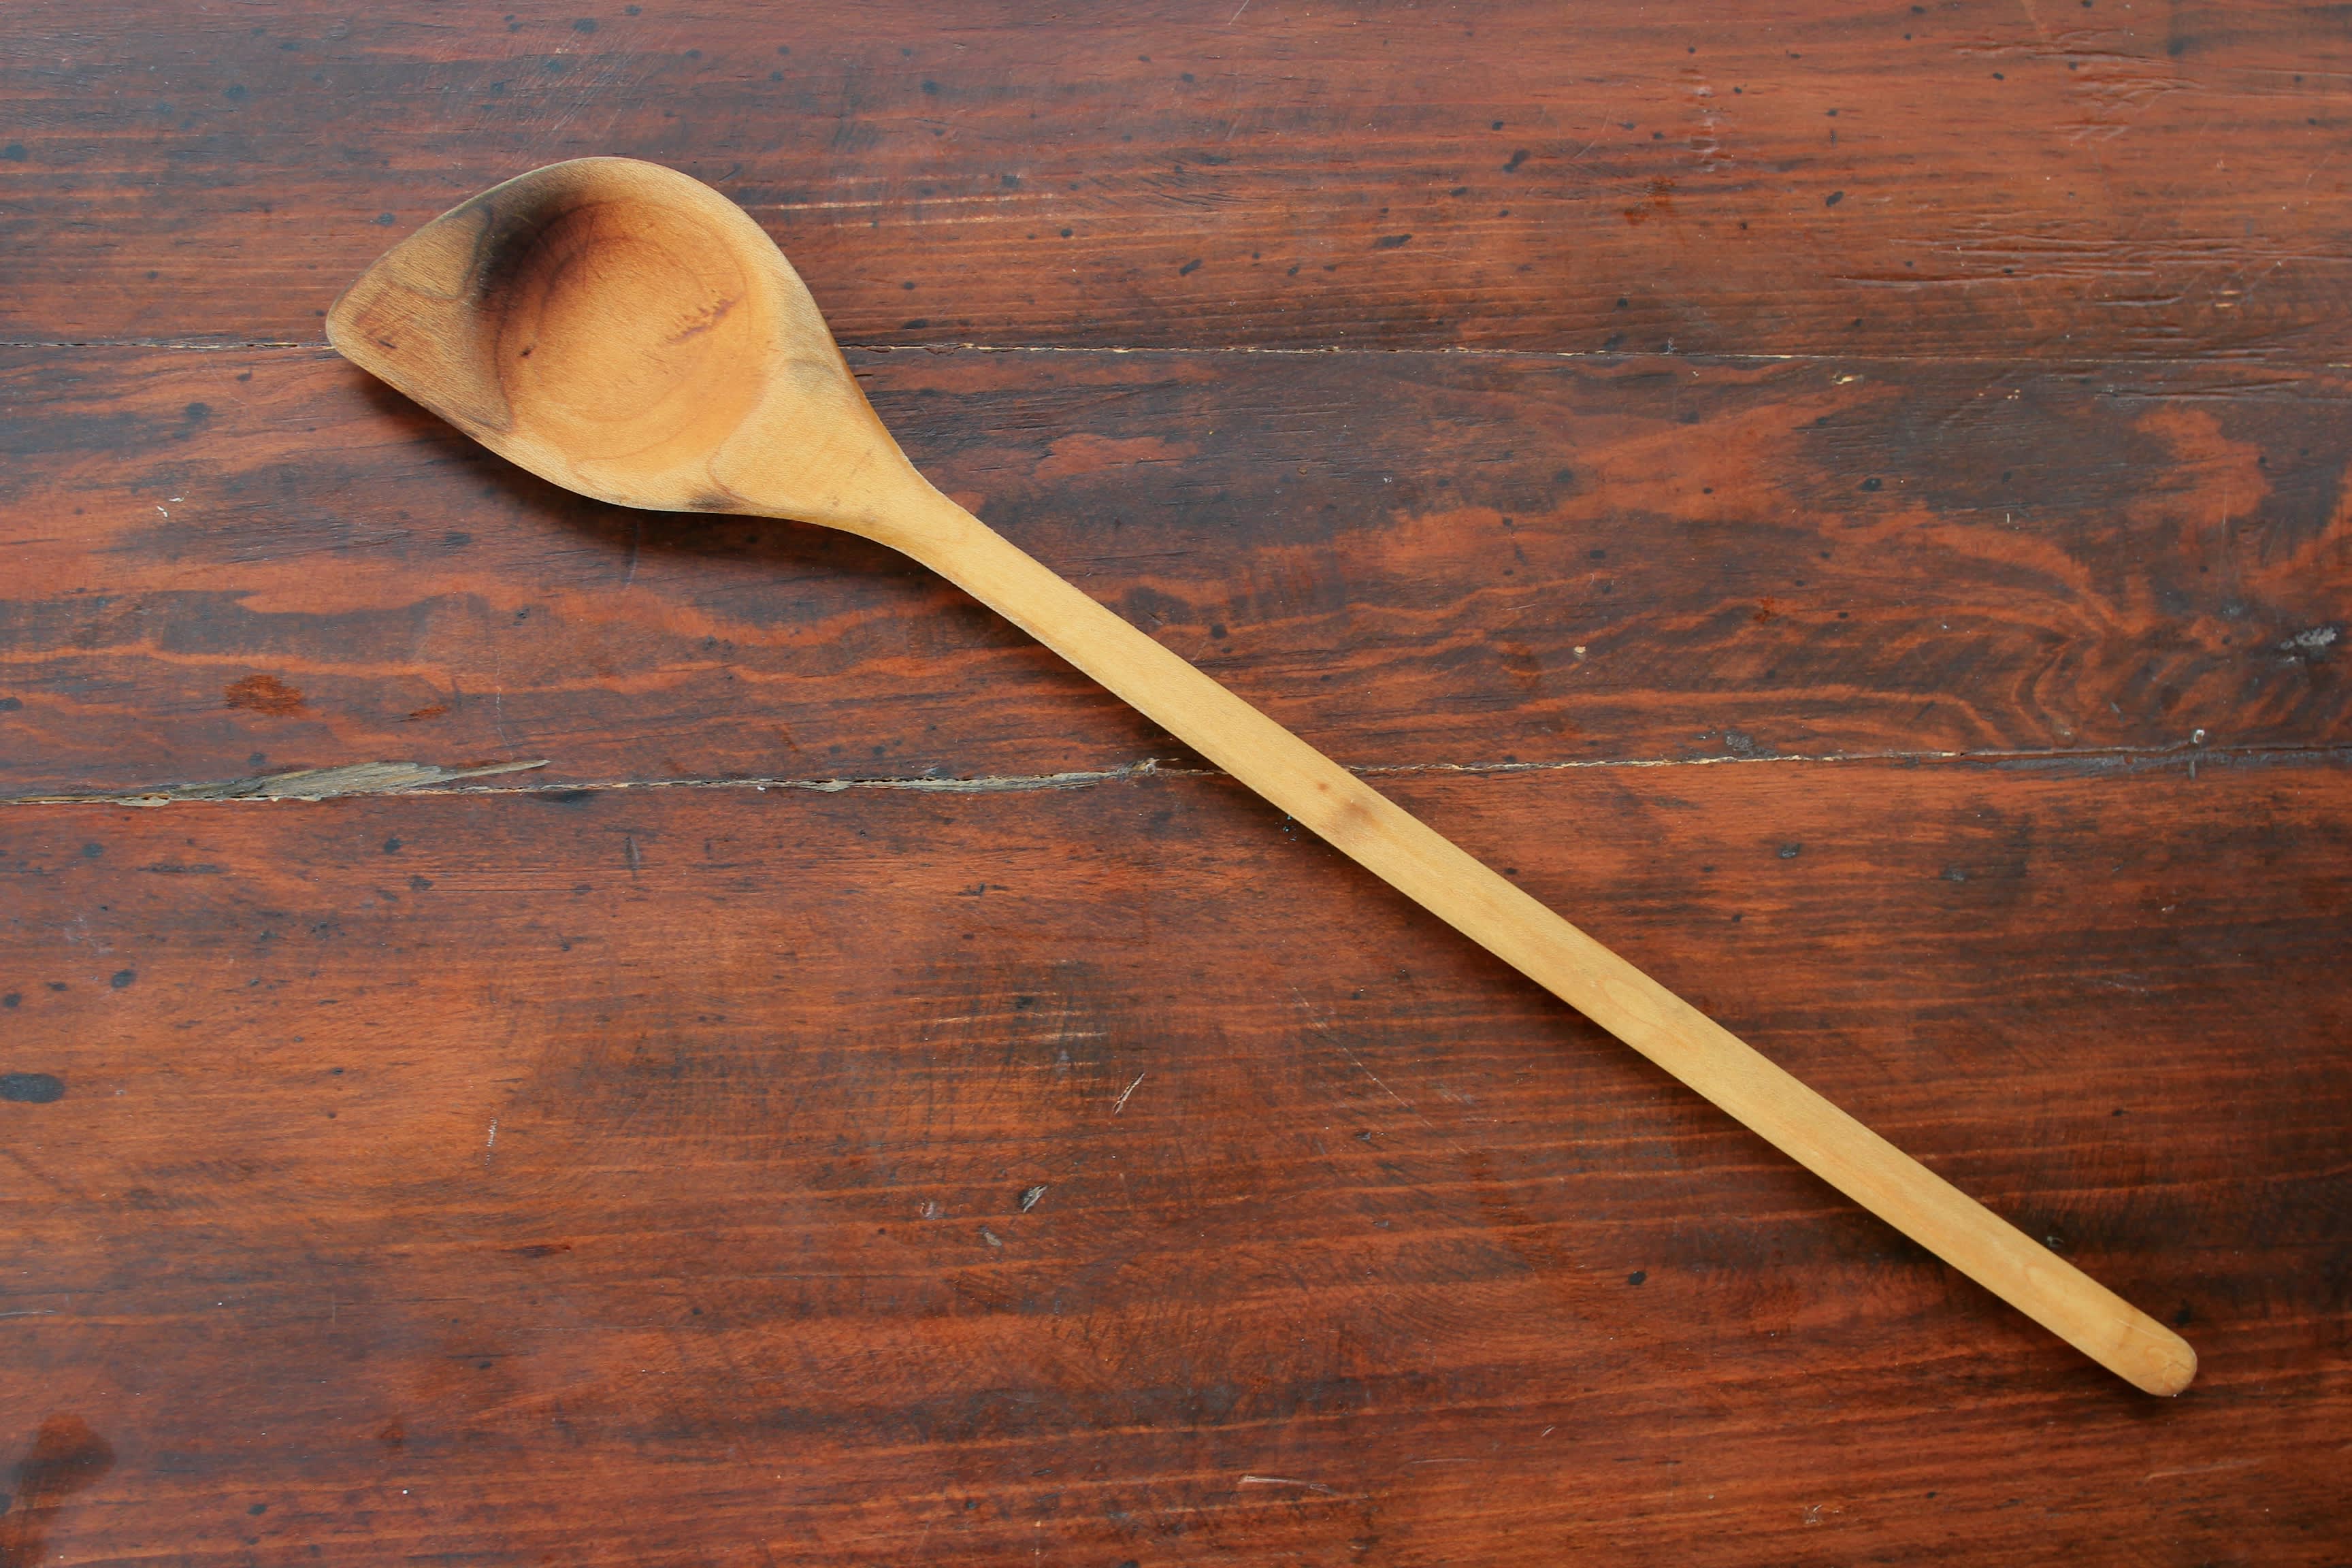 curved wooden spatula